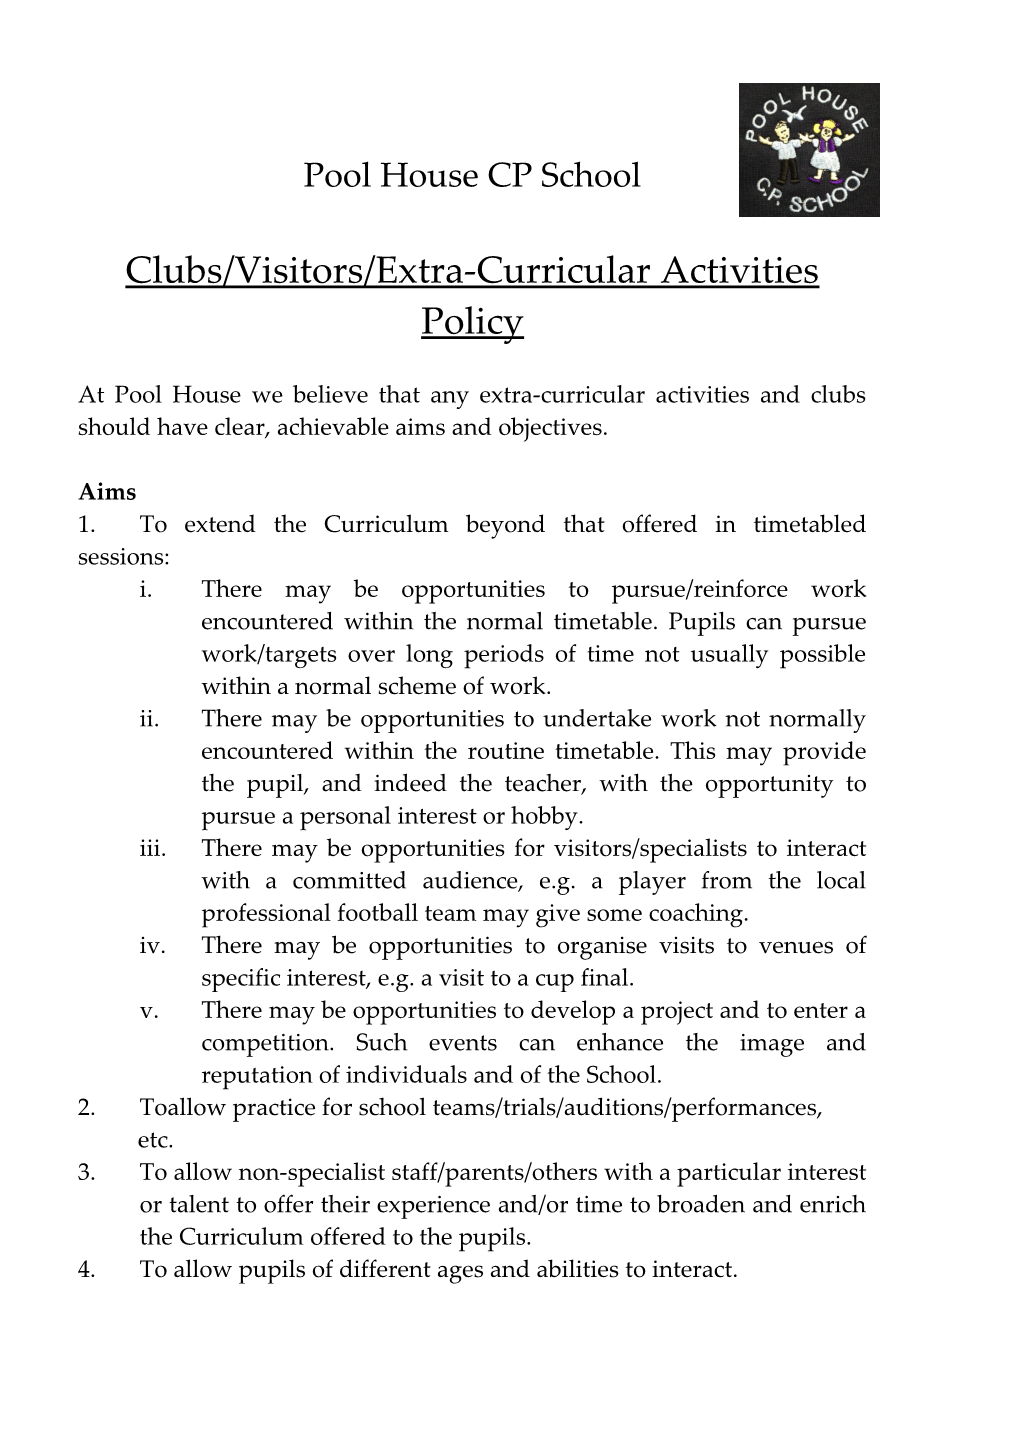 Clubs/Visitors/Extra-Curricular Activities Policy